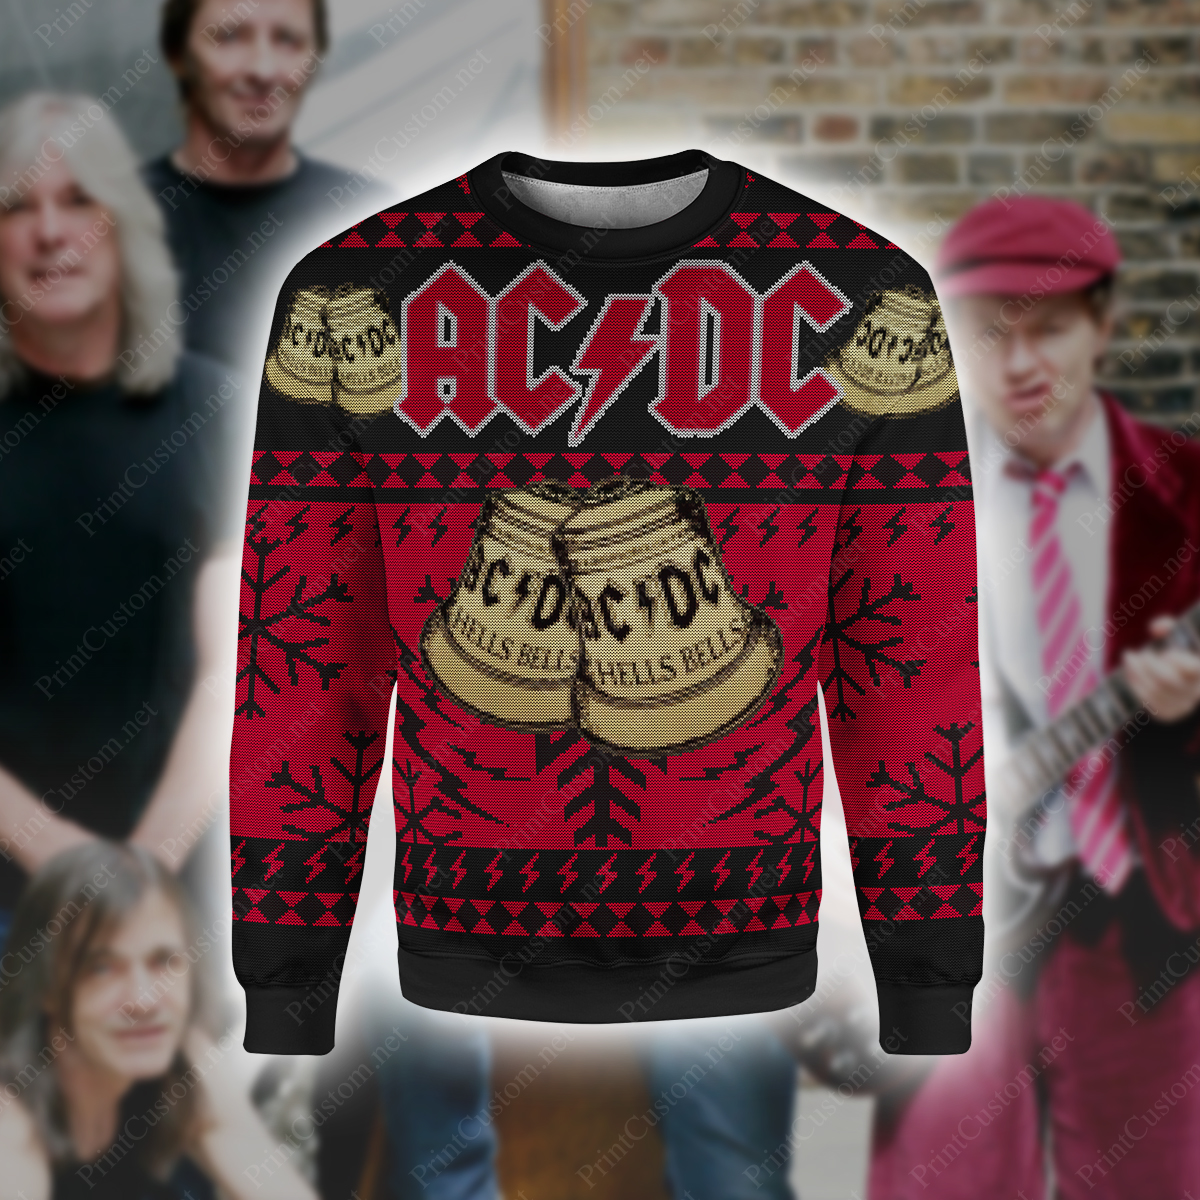 ACDC hells bells full printing ugly christmas sweater 2